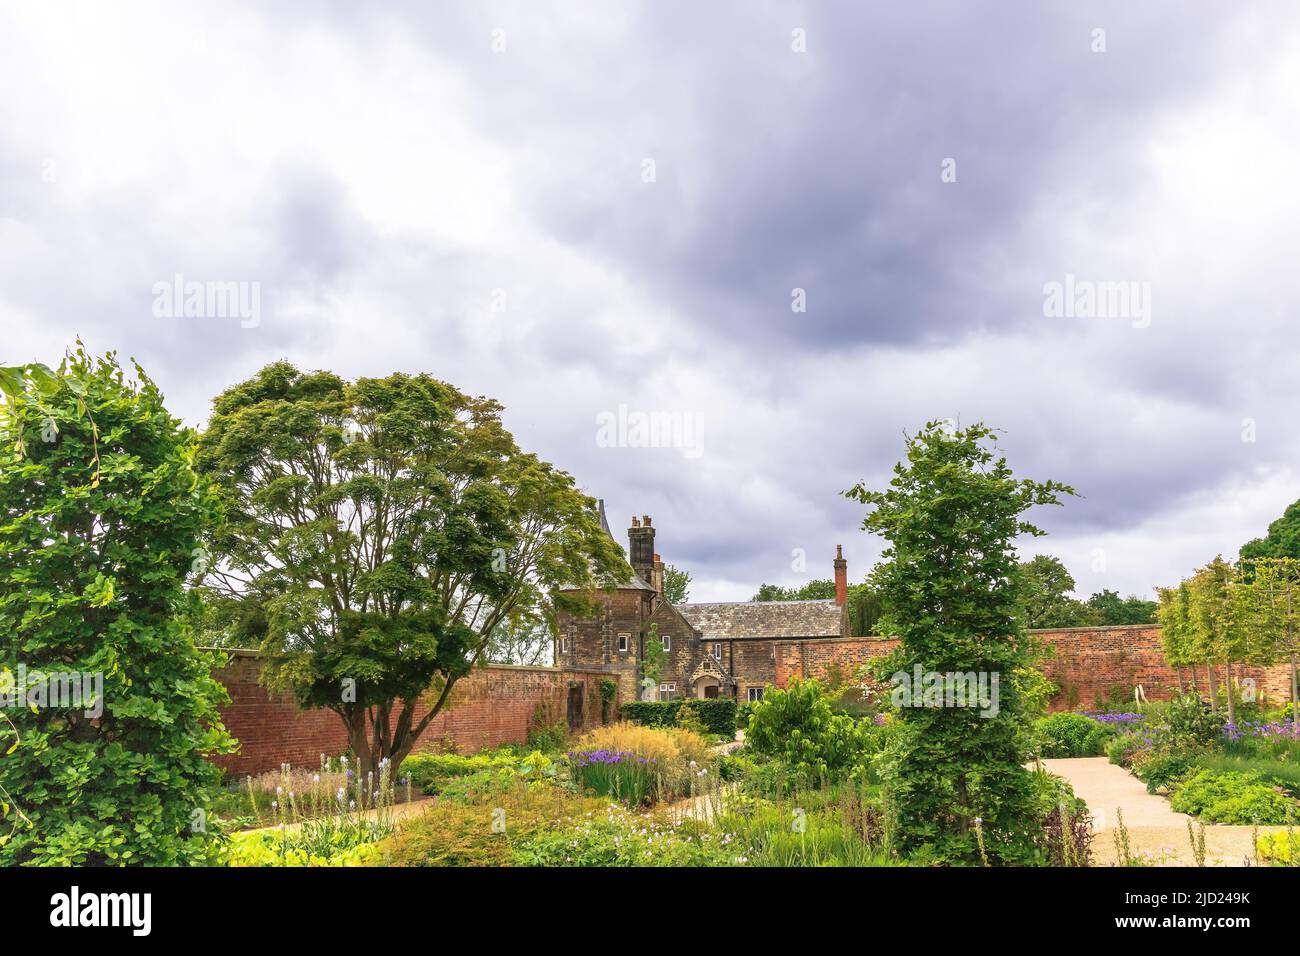 Walled garden area at the Royal Horticultural Society's fifth public display garden near Manchester, UK. Stock Photo